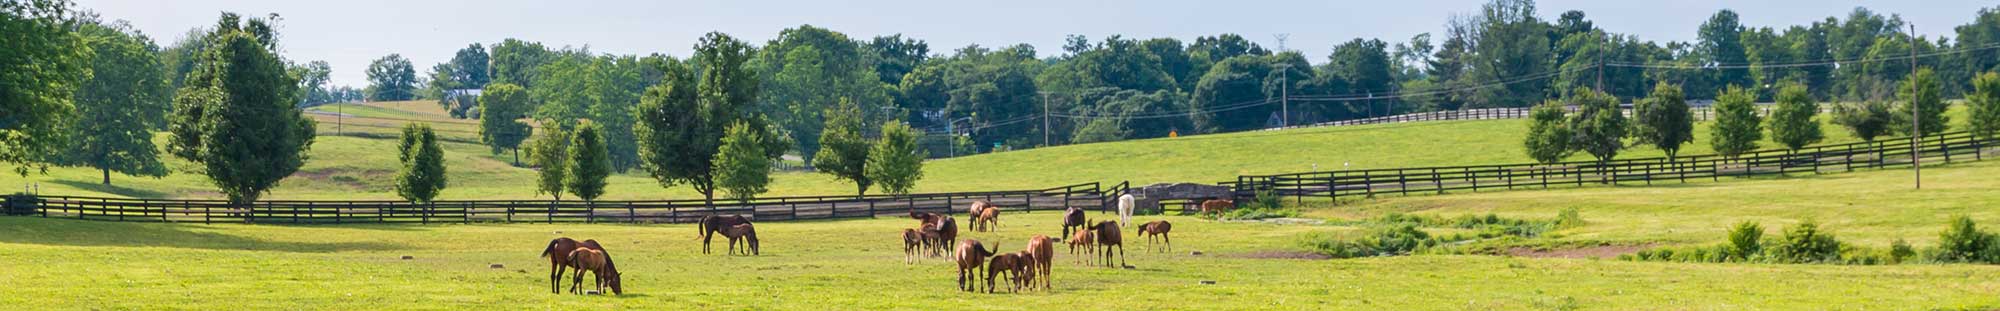 a field in Kentucky with horses